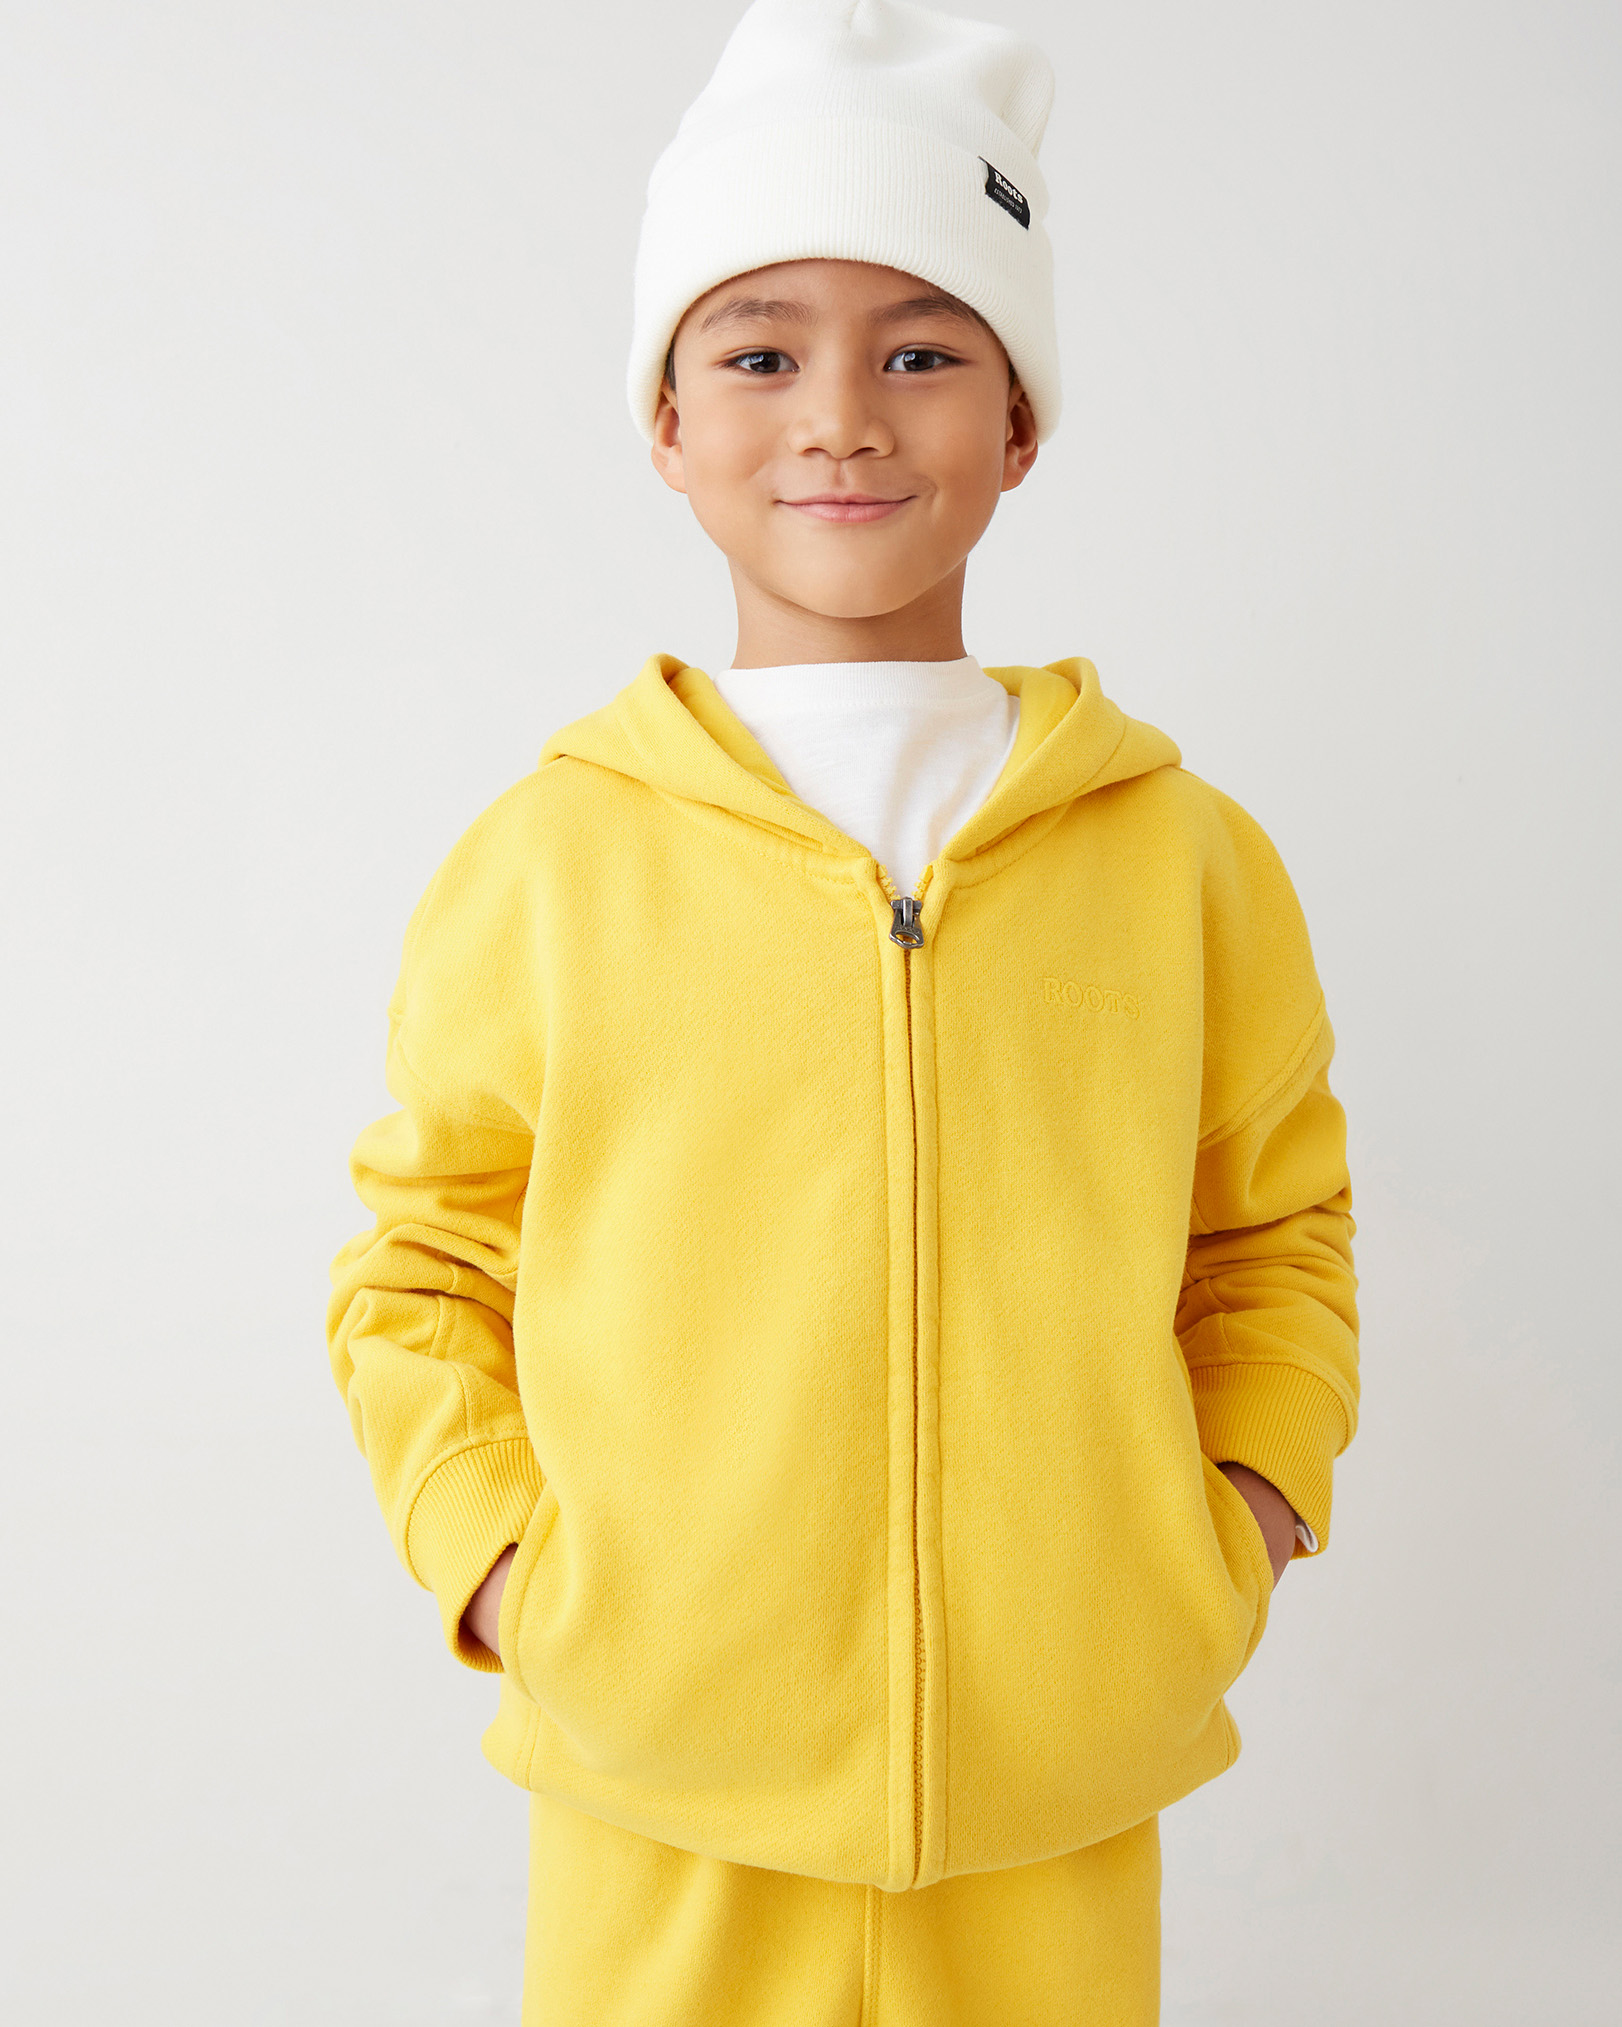 Roots Kids One Full Zip Hoodie Jacket in Daylily